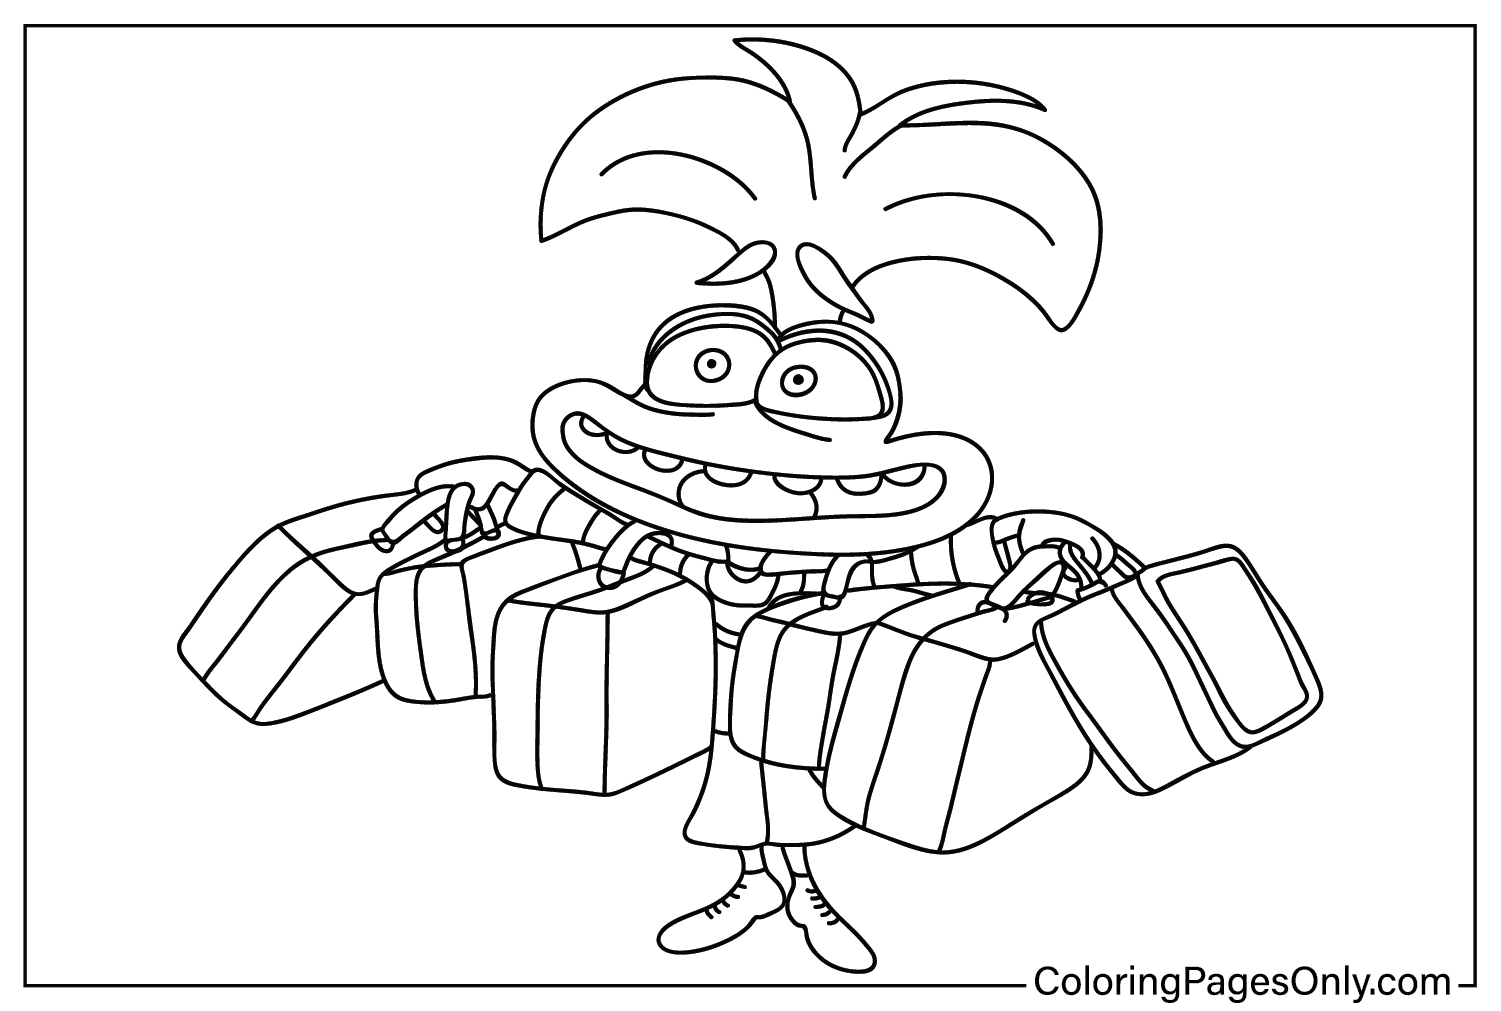 Concerned Inside Out 2 Coloring Page from Inside Out 2